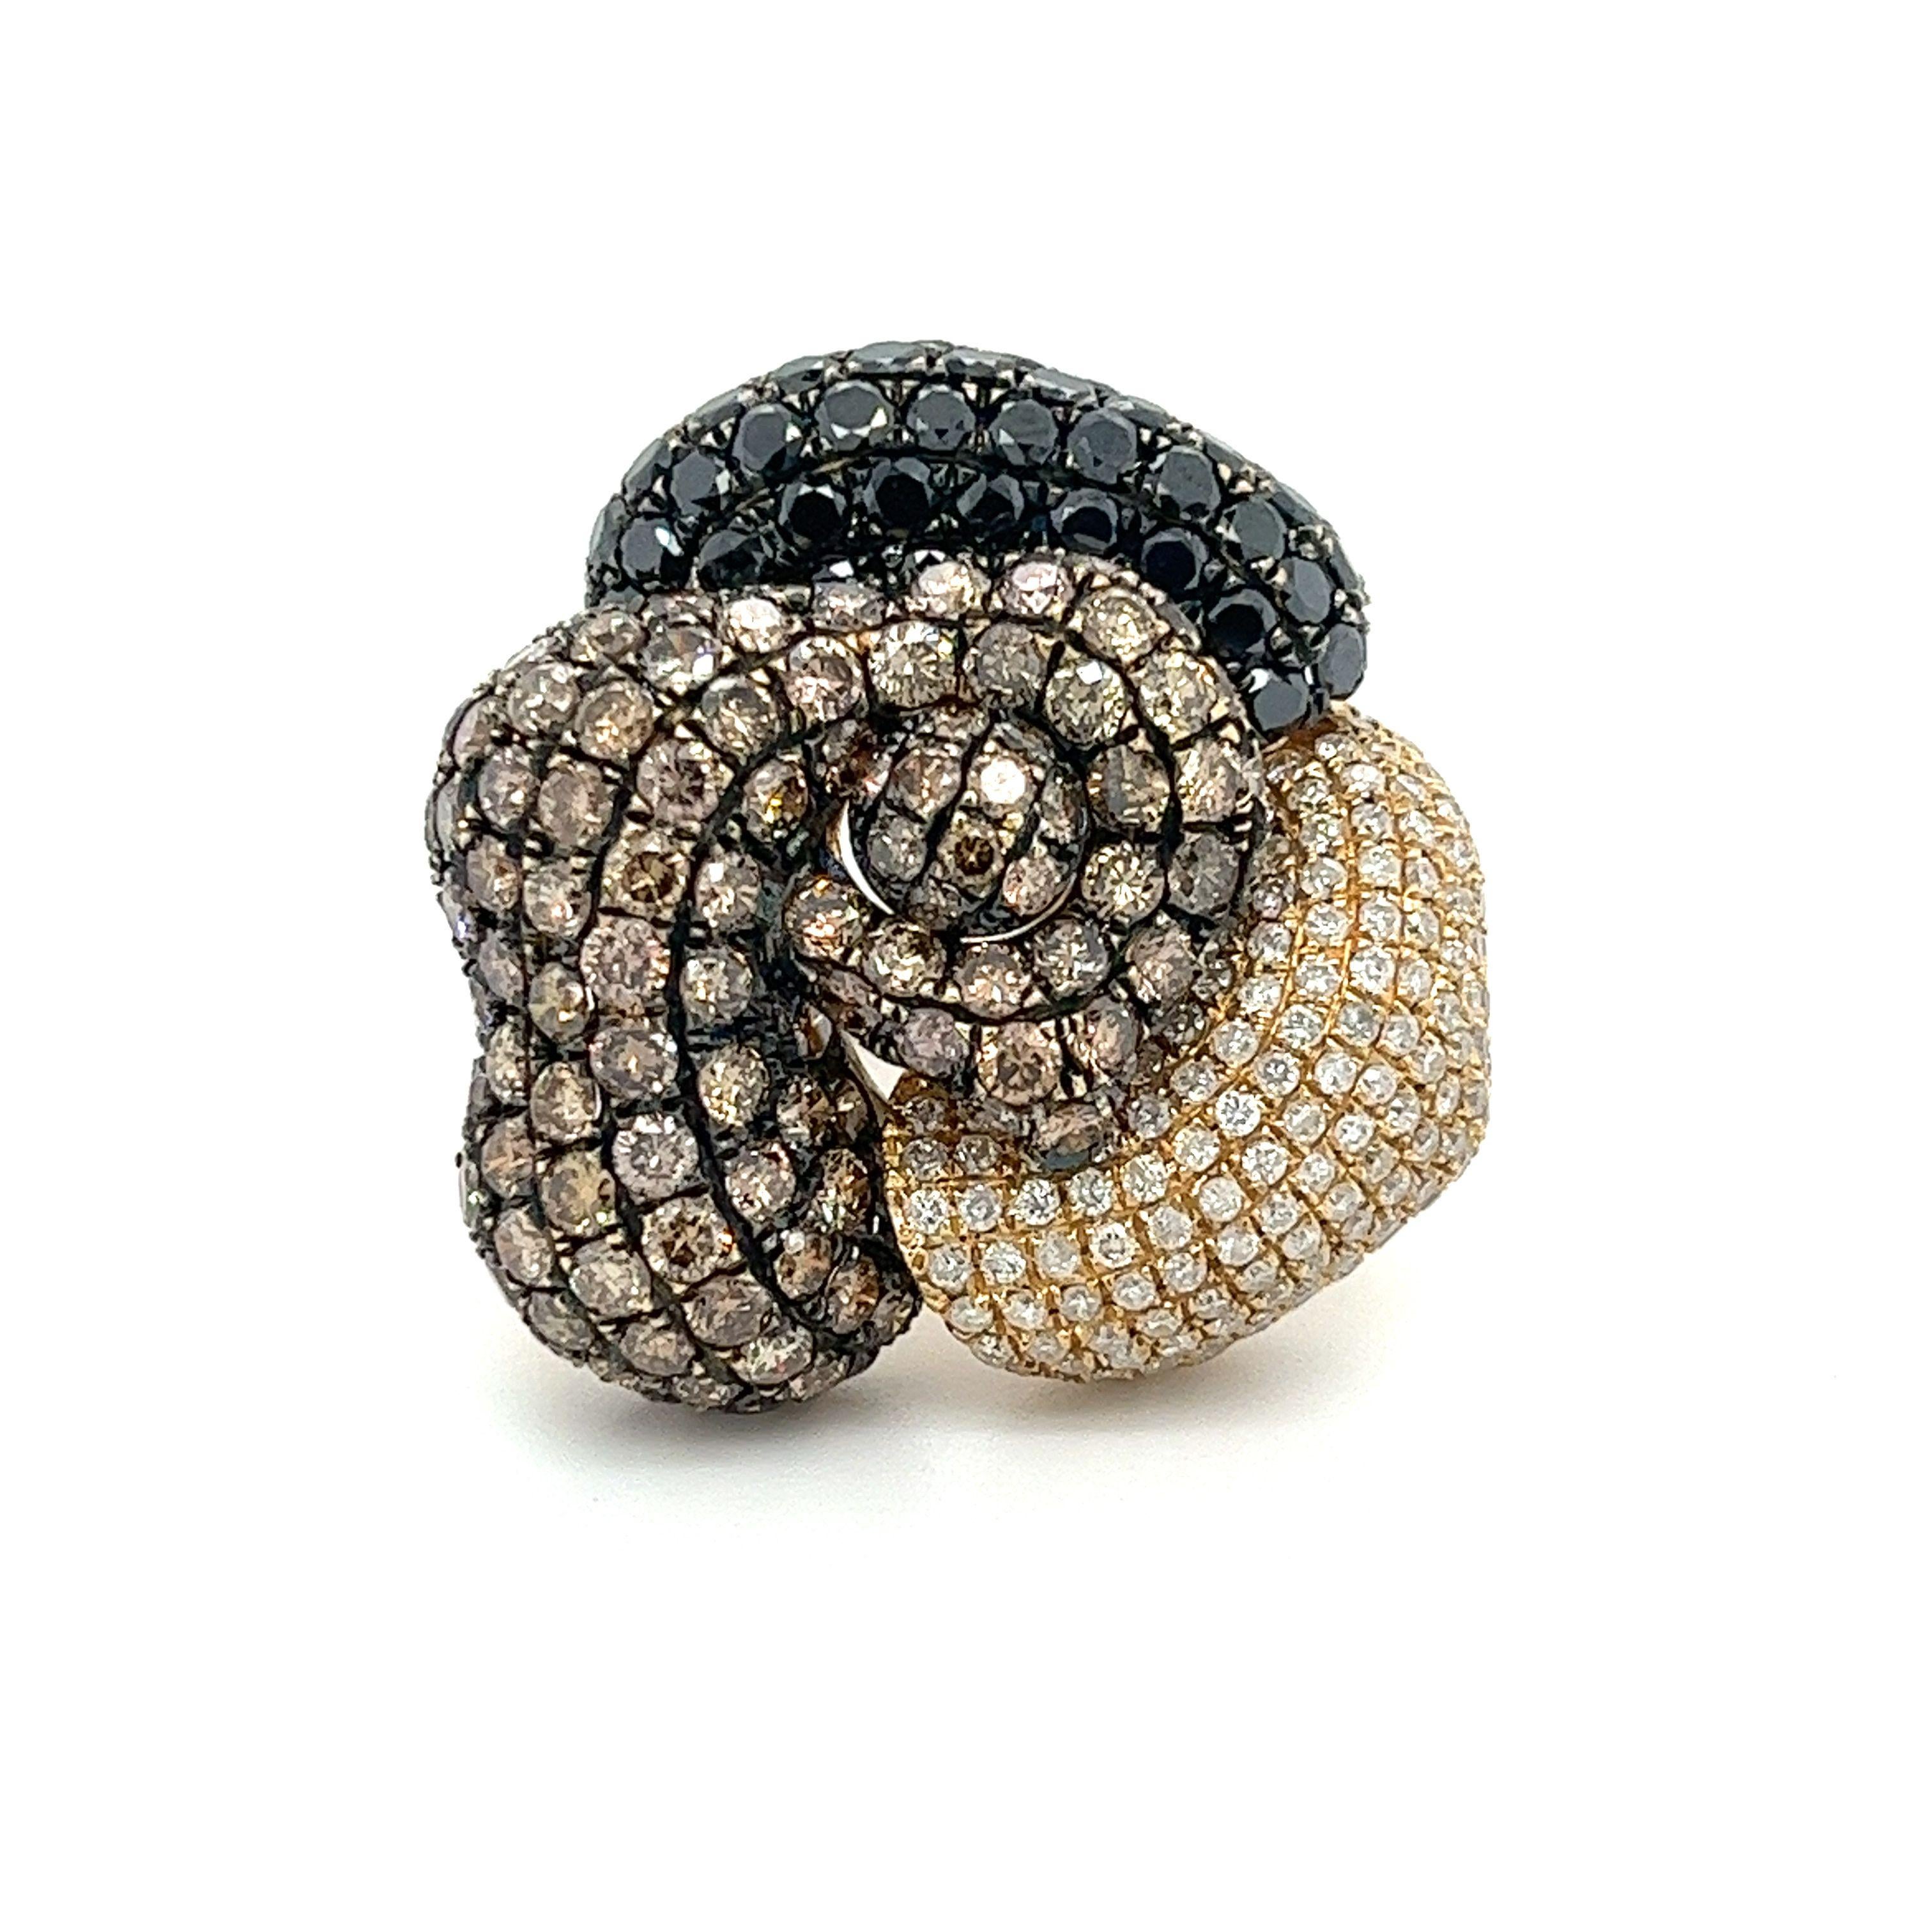 6 carat total brown, black, and white diamond cluster flower ring, a true masterpiece crafted in luxurious 18k yellow gold. This magnificent piece is the perfect combination of boldness and sophistication, designed to leave a lasting impression on